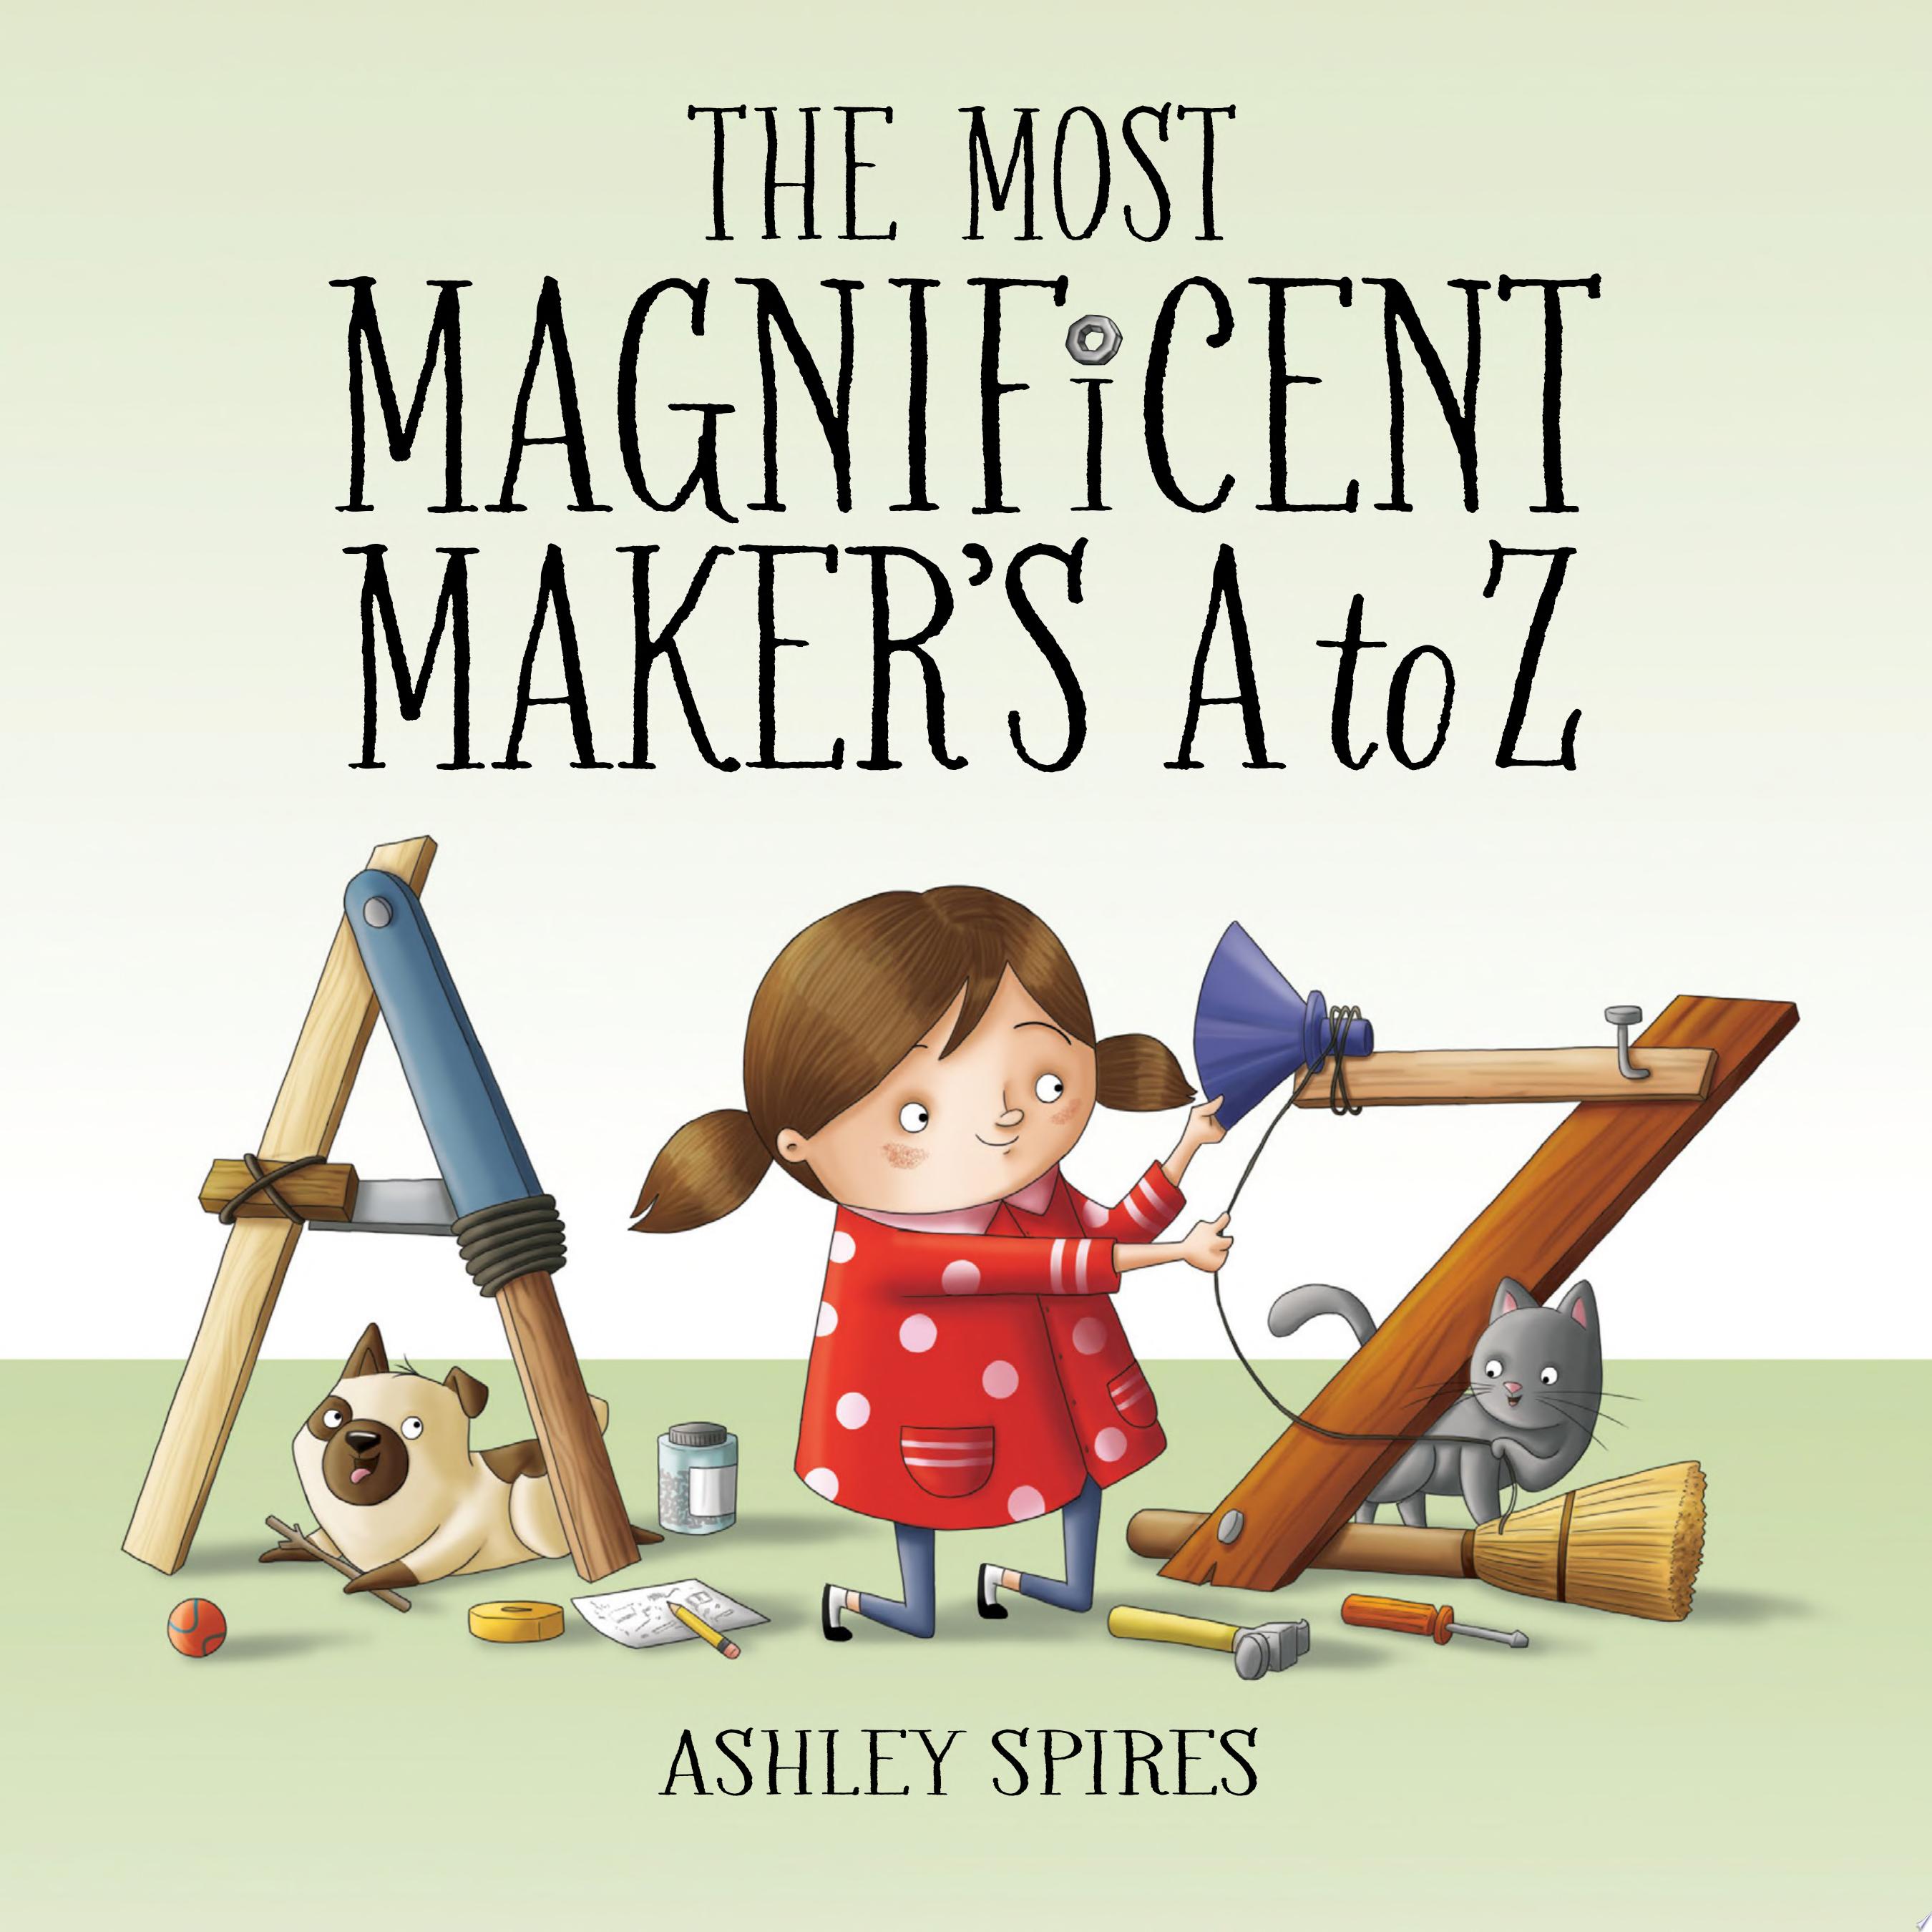 Image for "The Most Magnificent Maker&#039;s A to Z"